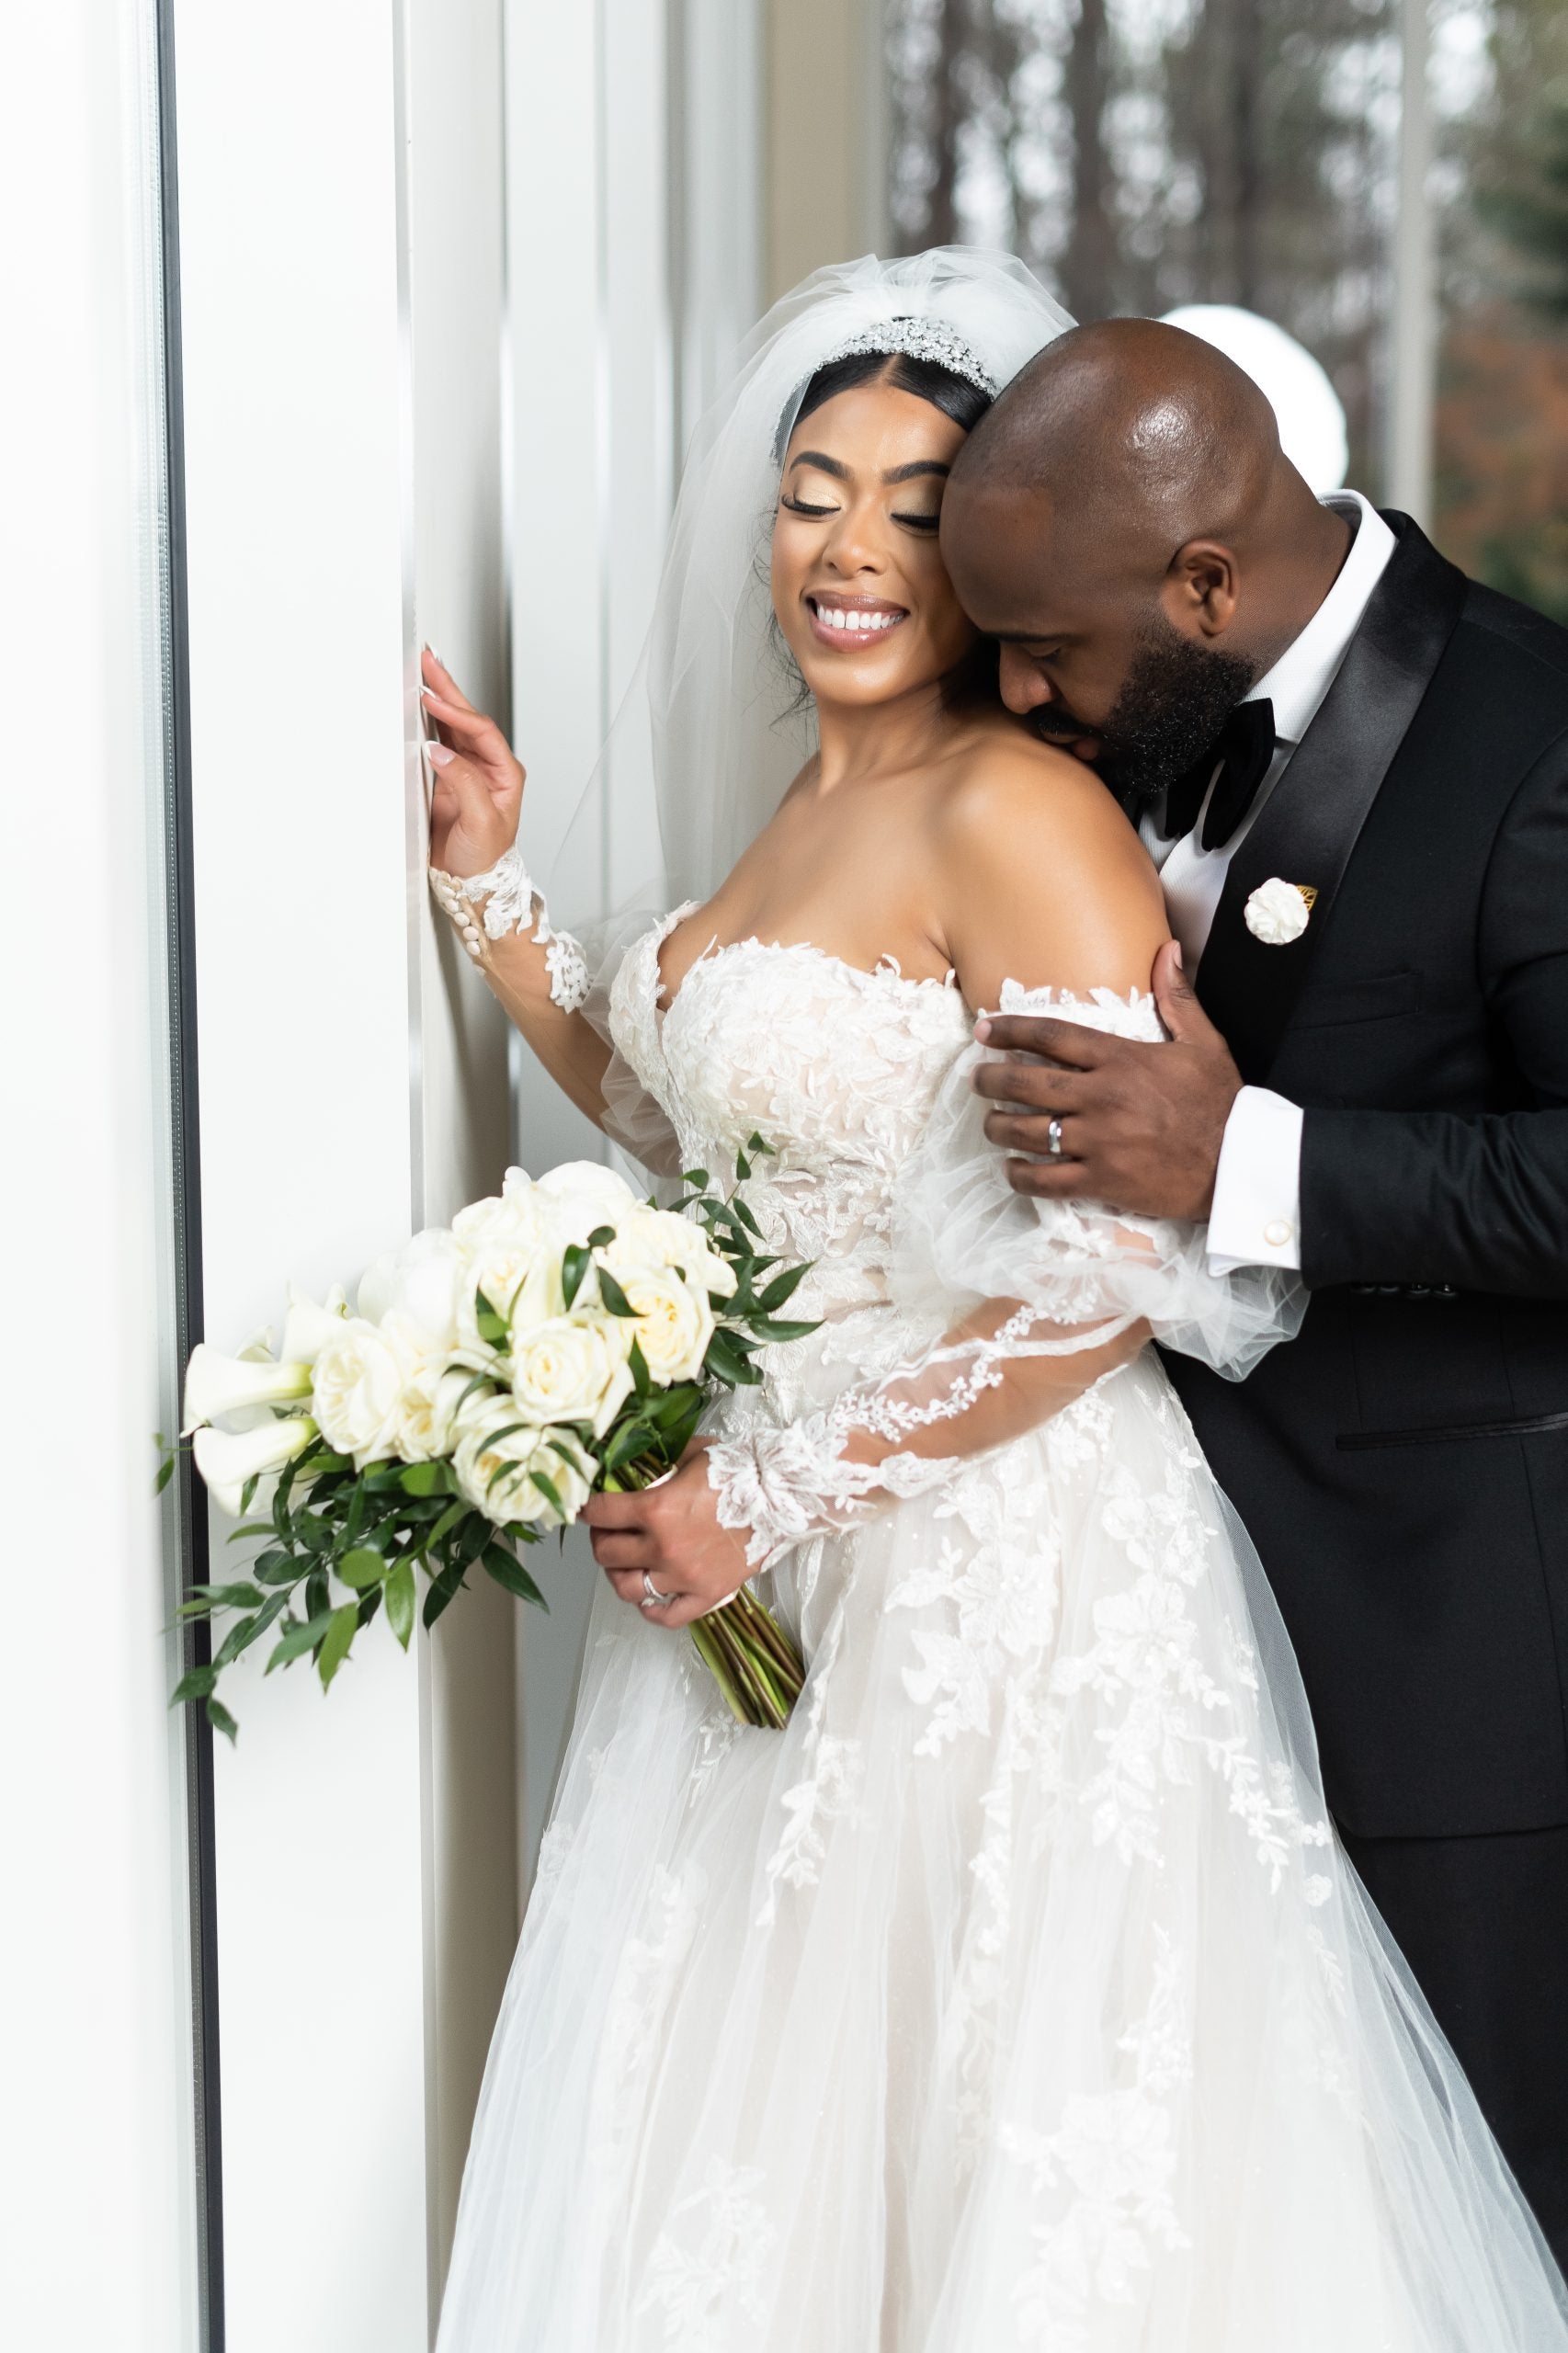 Bridal Bliss: Andrea And Ronel's Wedding Was A Full Fête With Masquerade Dancers And West Indian Flags